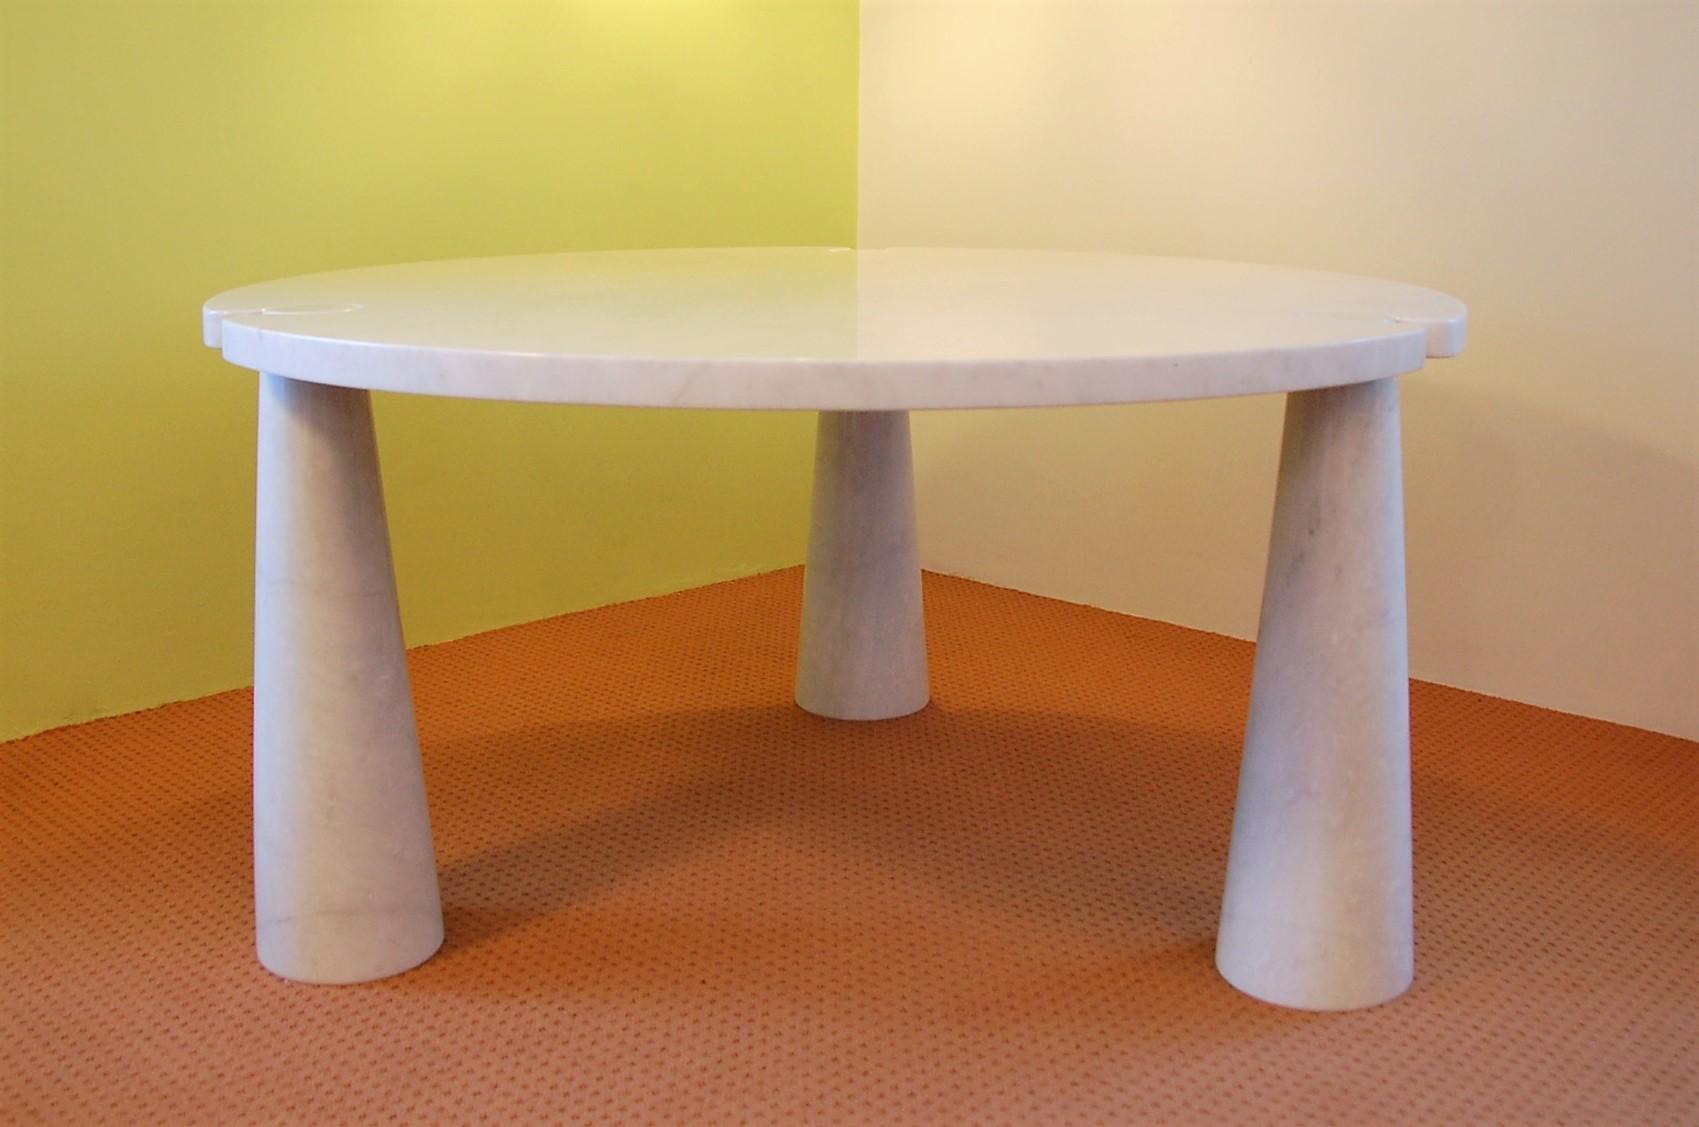 This beautiful and elegant round marble dining table was designed by Angelo Mangiarotti for Skipper in 1971. It is made solely of white Carrara marble. The top slides over the three cone shaped legs which makes it a very solid construction. This